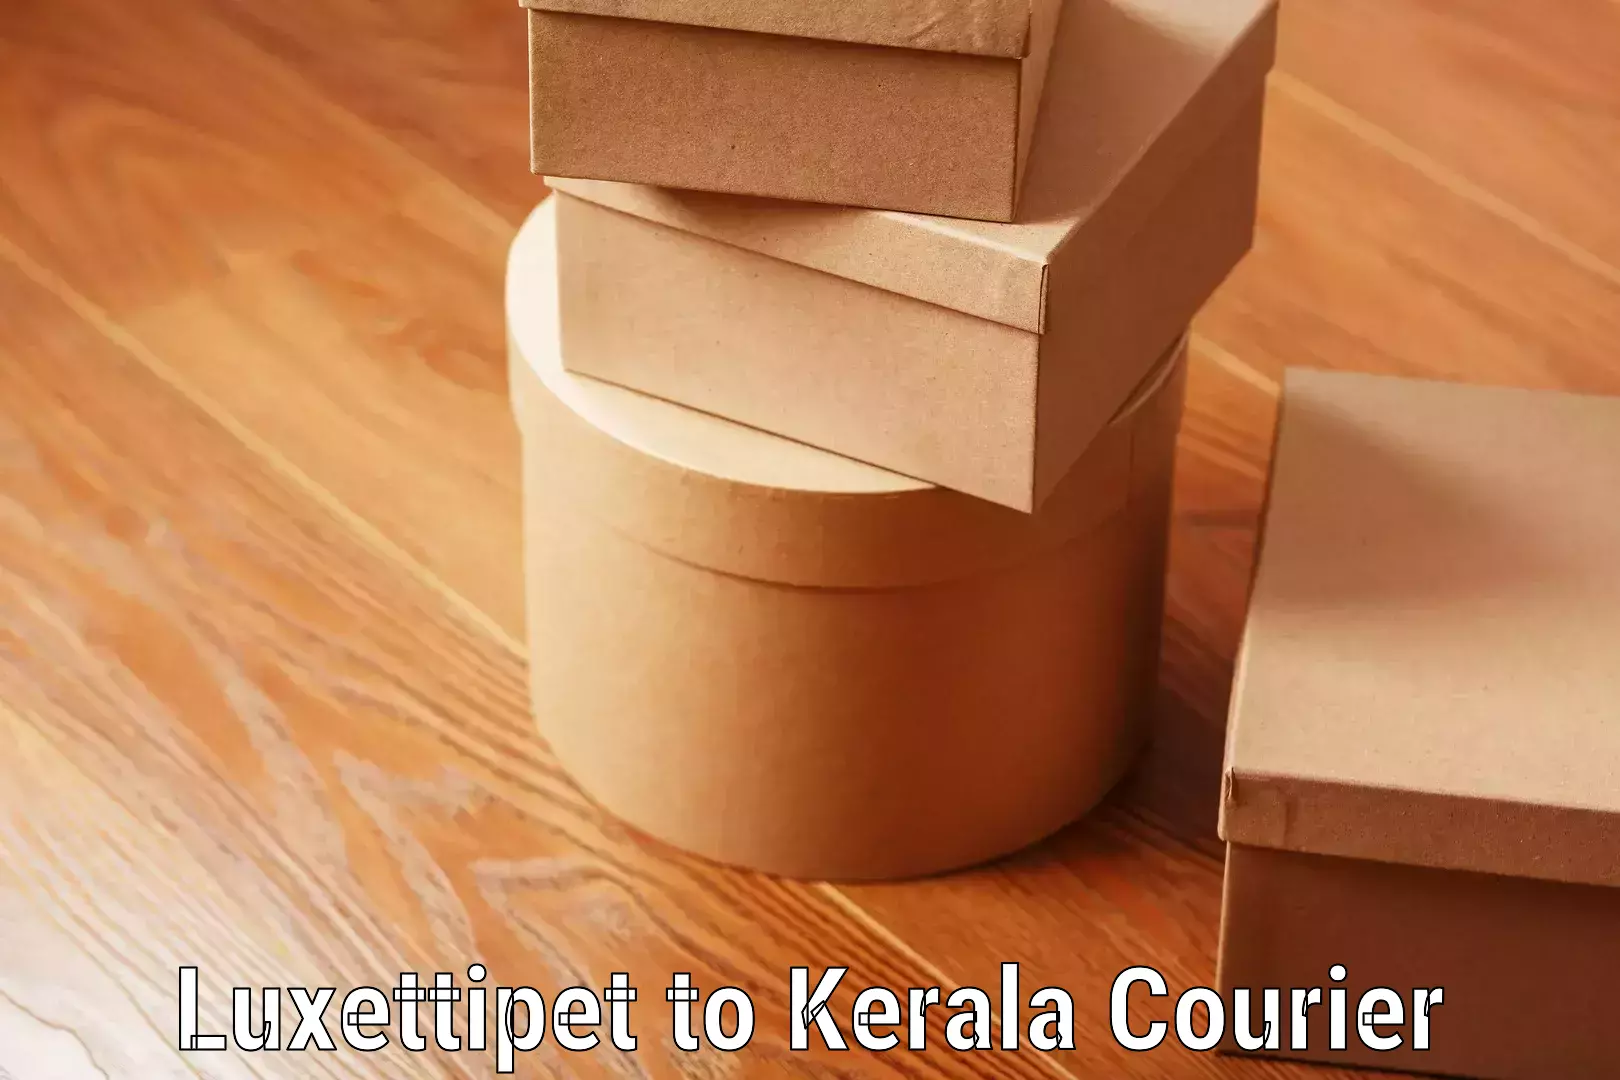 Baggage shipping experience Luxettipet to Kerala